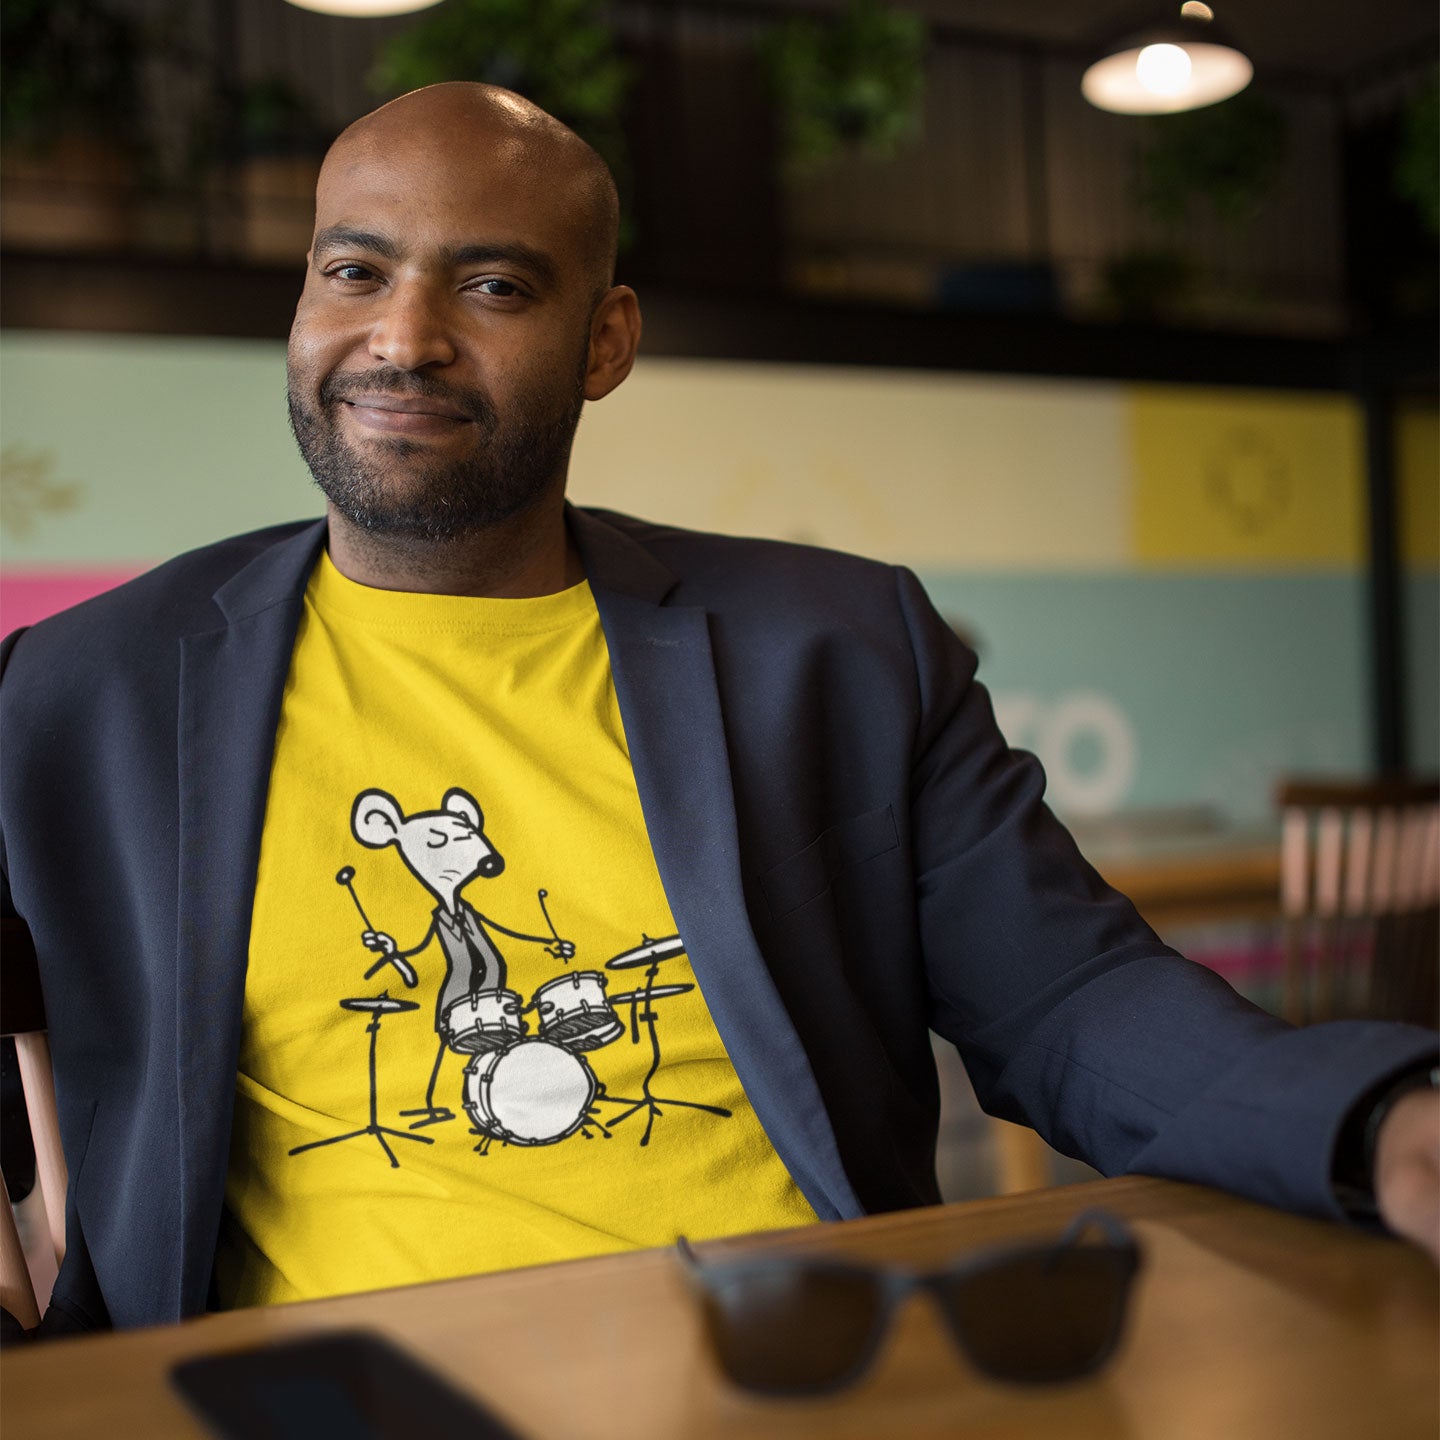 guy wearing a blazer and yellow t-shirt with a mouse playing drums print